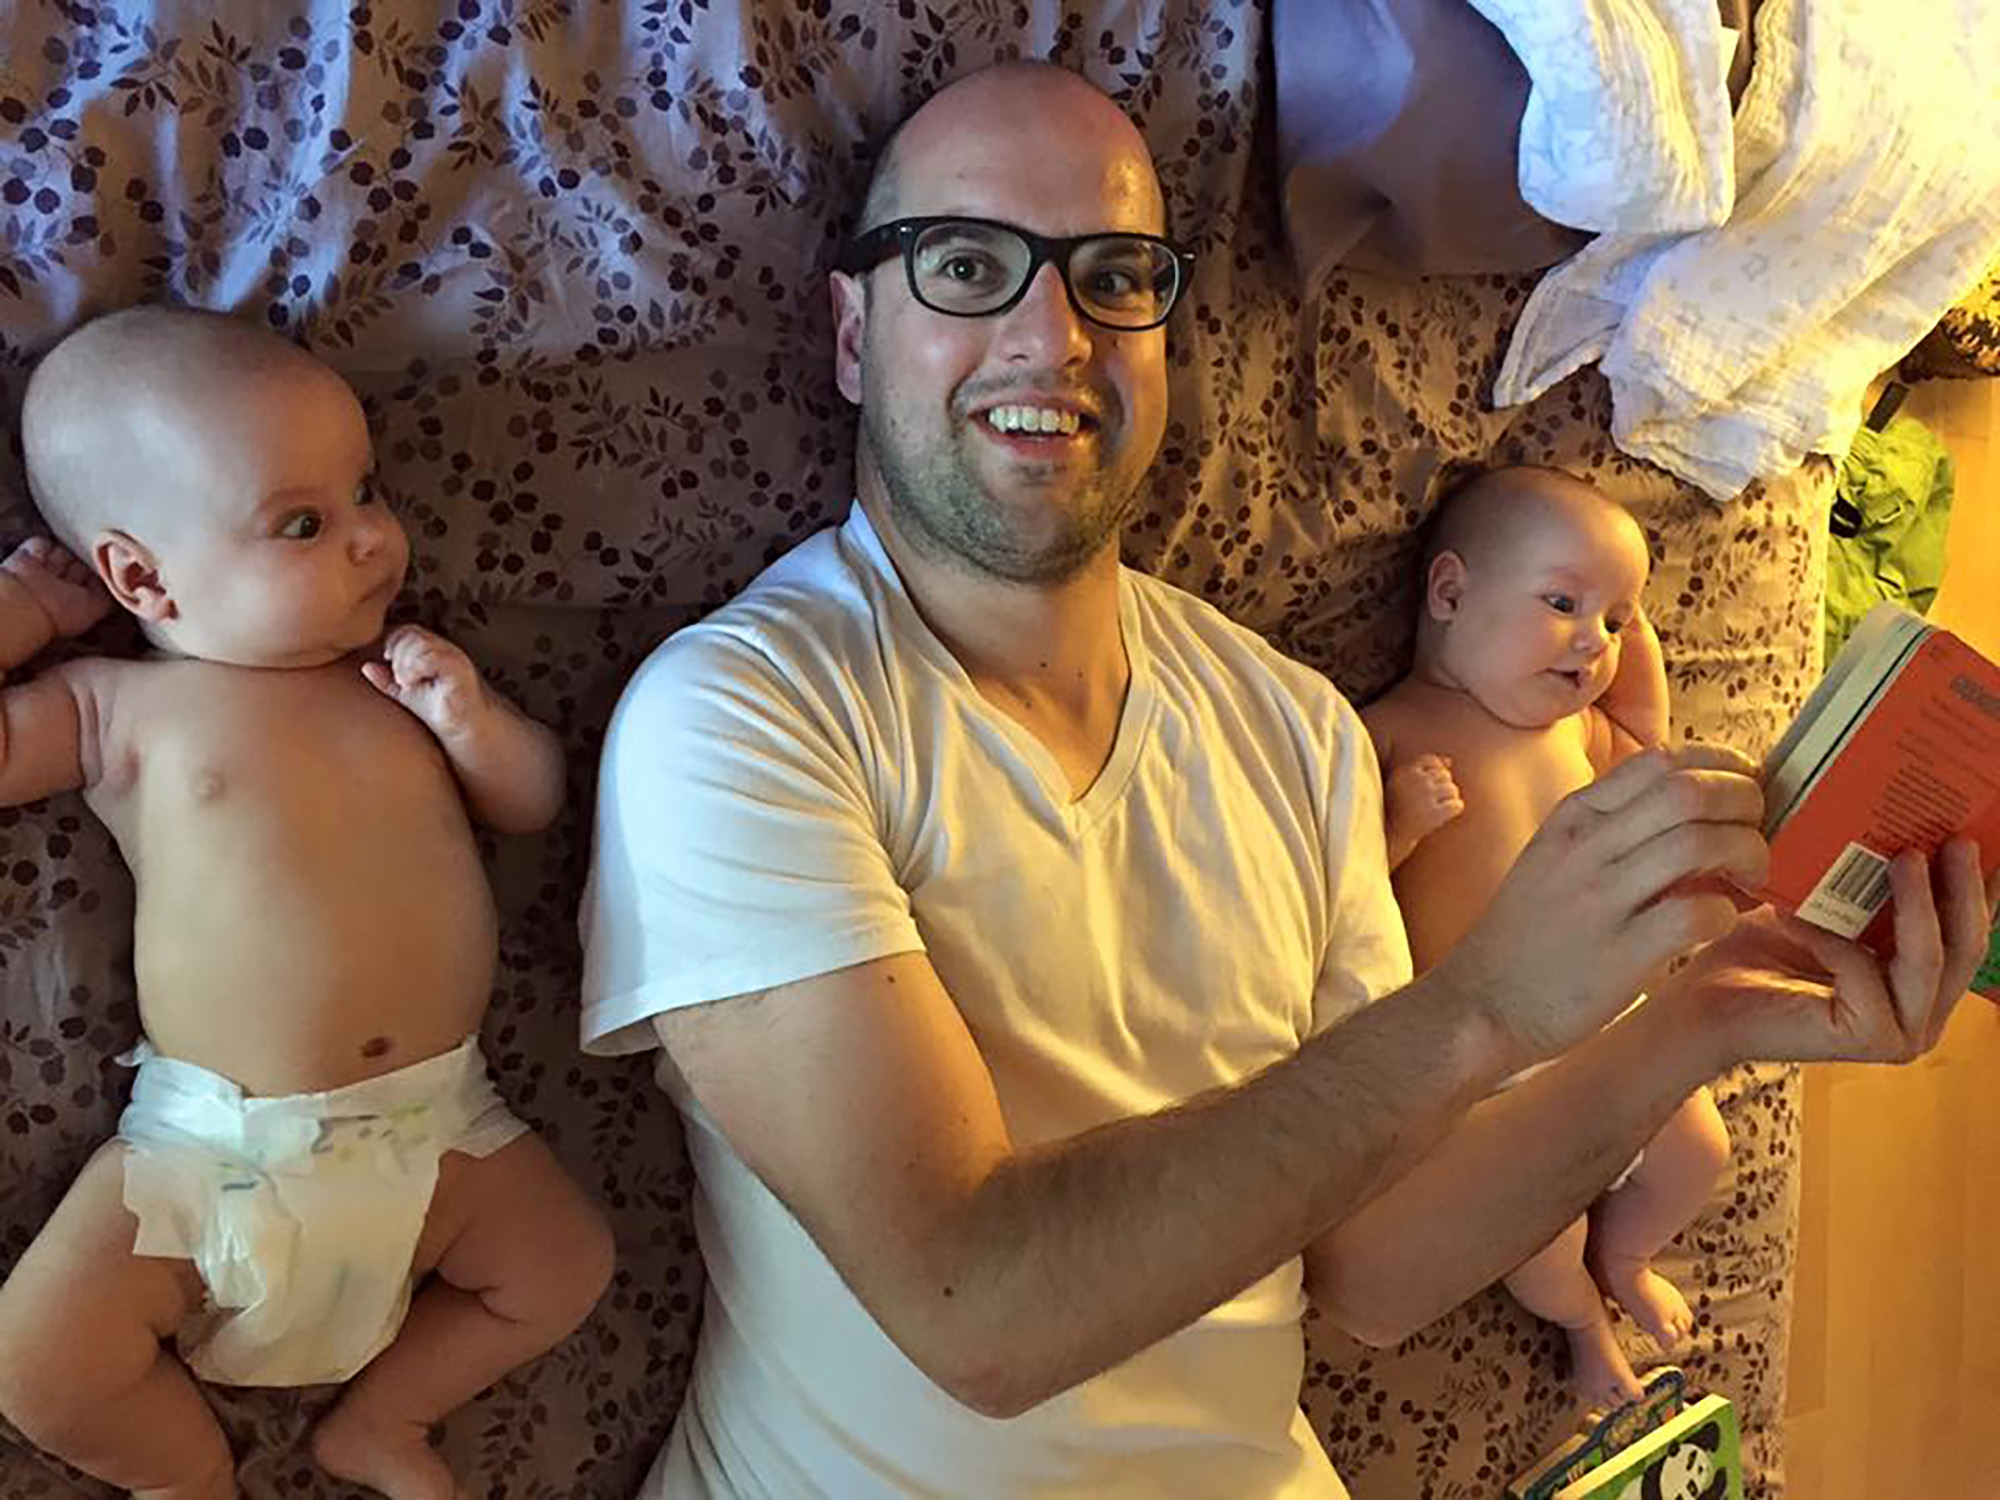 In this family photograph, Michael Clinard is pictured reading a children's book to his newborn twins in bed, during June 2015.